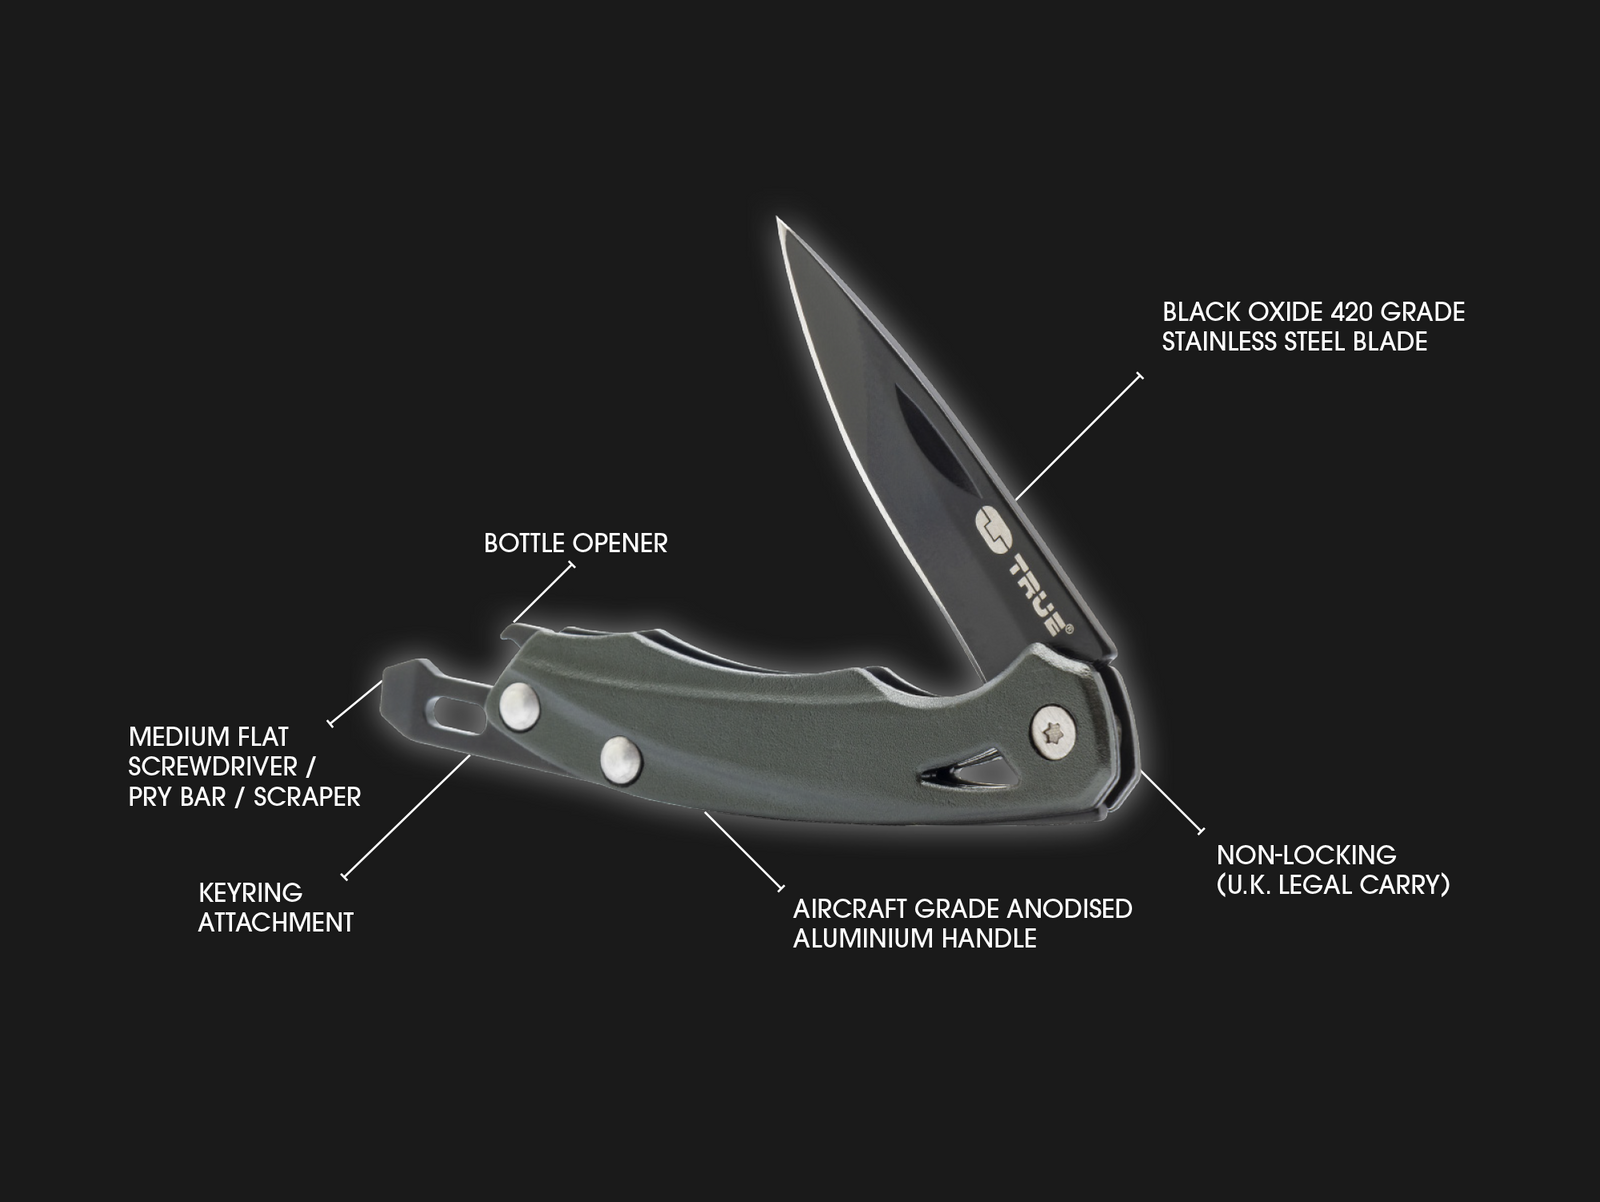 True Utility Slip Knife, features, blade, keyring attachment, screwdriver, pry bar and scraper. Its a pocket knife but also a multi tool